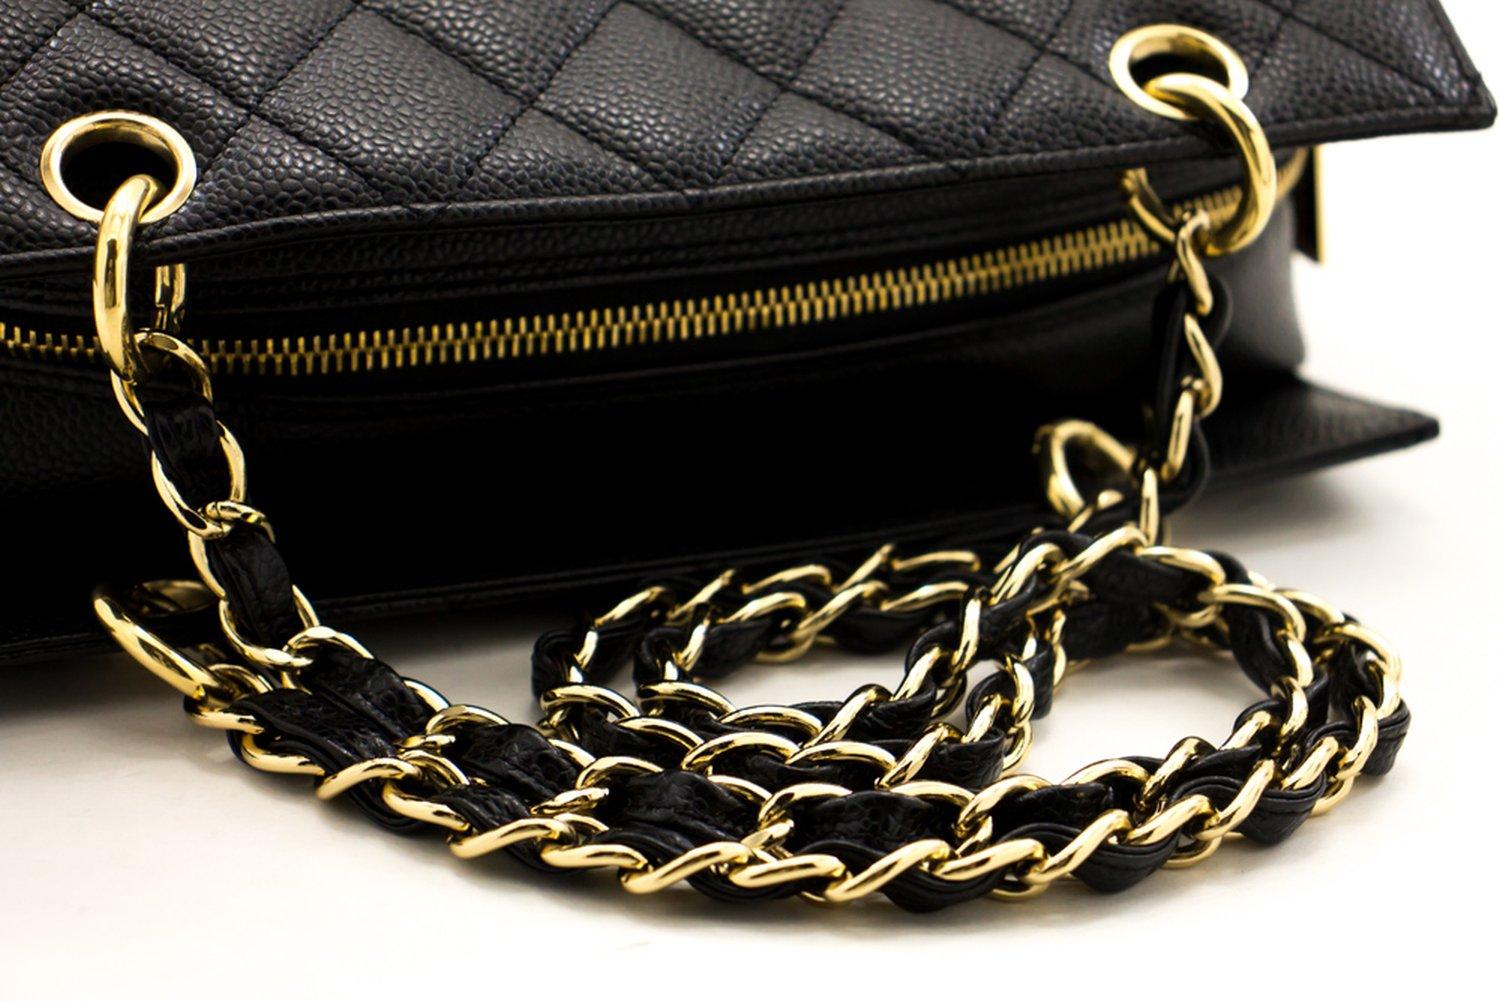 CHANEL Caviar Chain Shoulder Shopping Tote Bag Black Quilted Purse 8